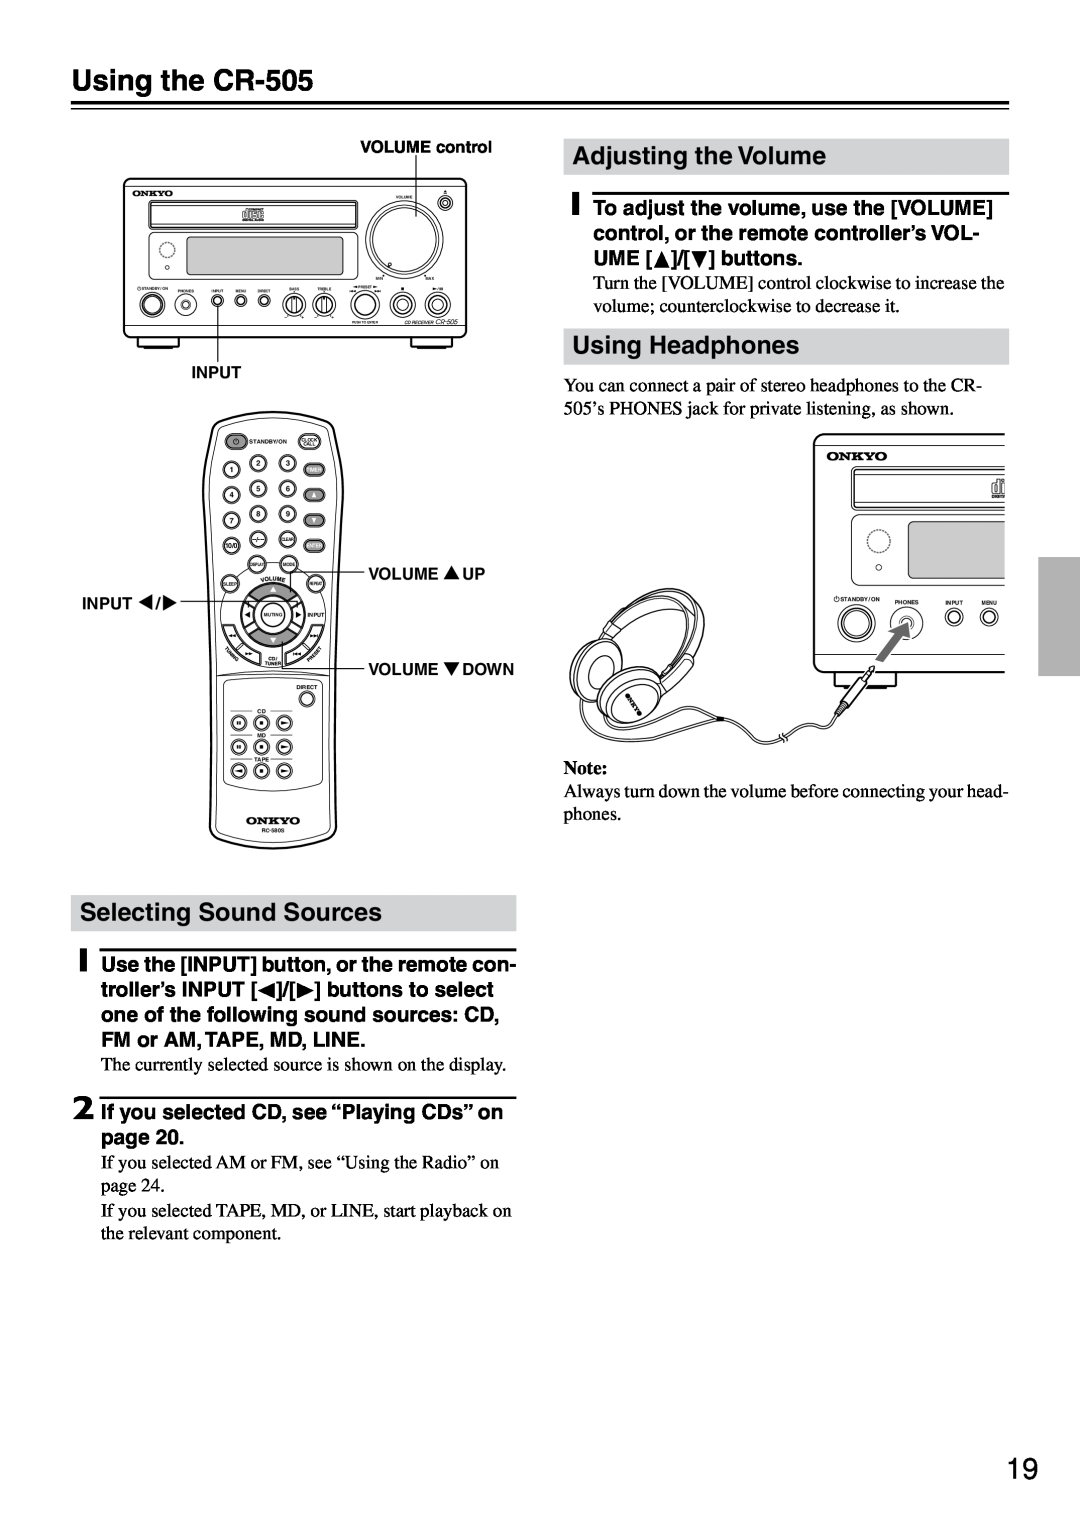 Onkyo instruction manual Using the CR-505, Adjusting the Volume, Using Headphones, Selecting Sound Sources 